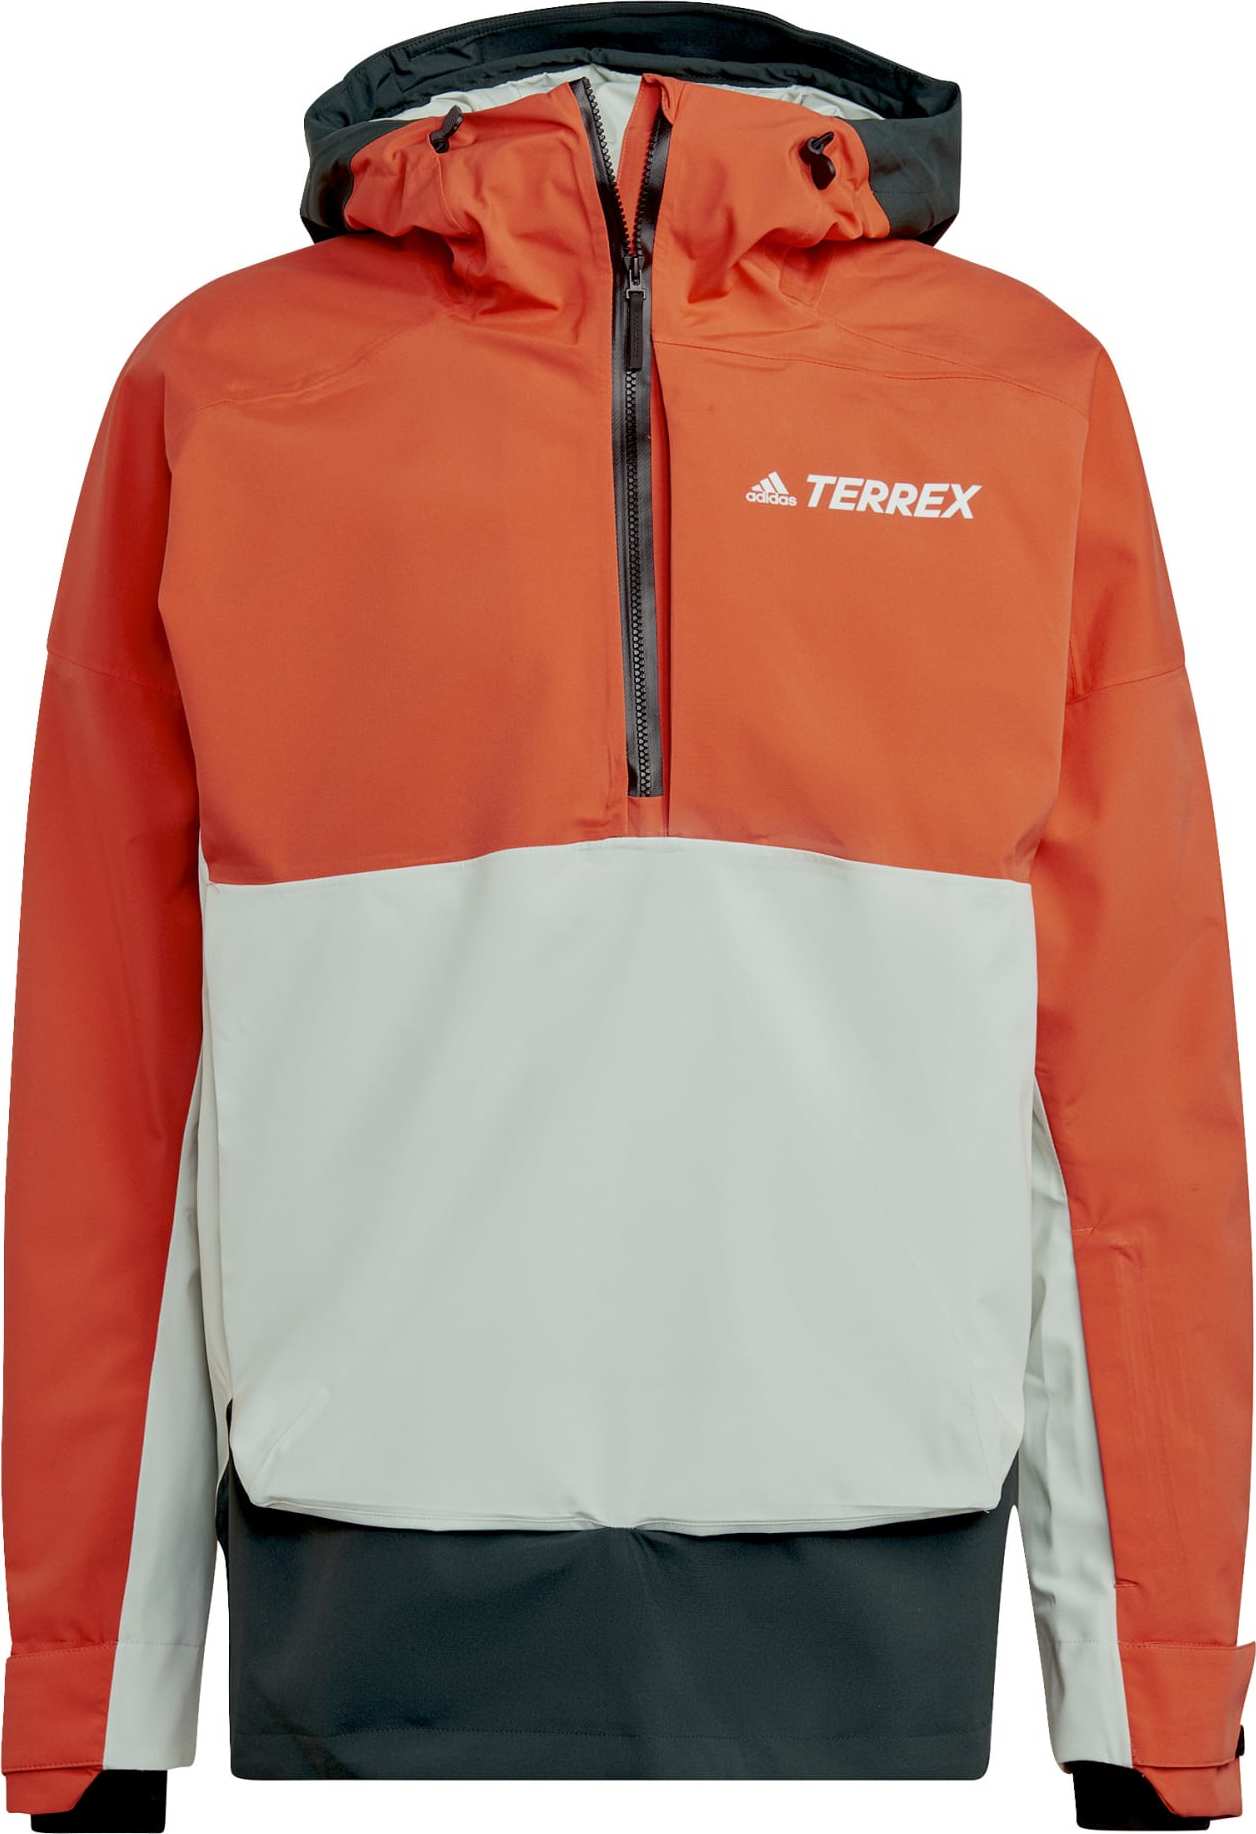 Buy Adidas Men's Terrex 2-Layer Non-Insulated Snow Anorak from Outnorth